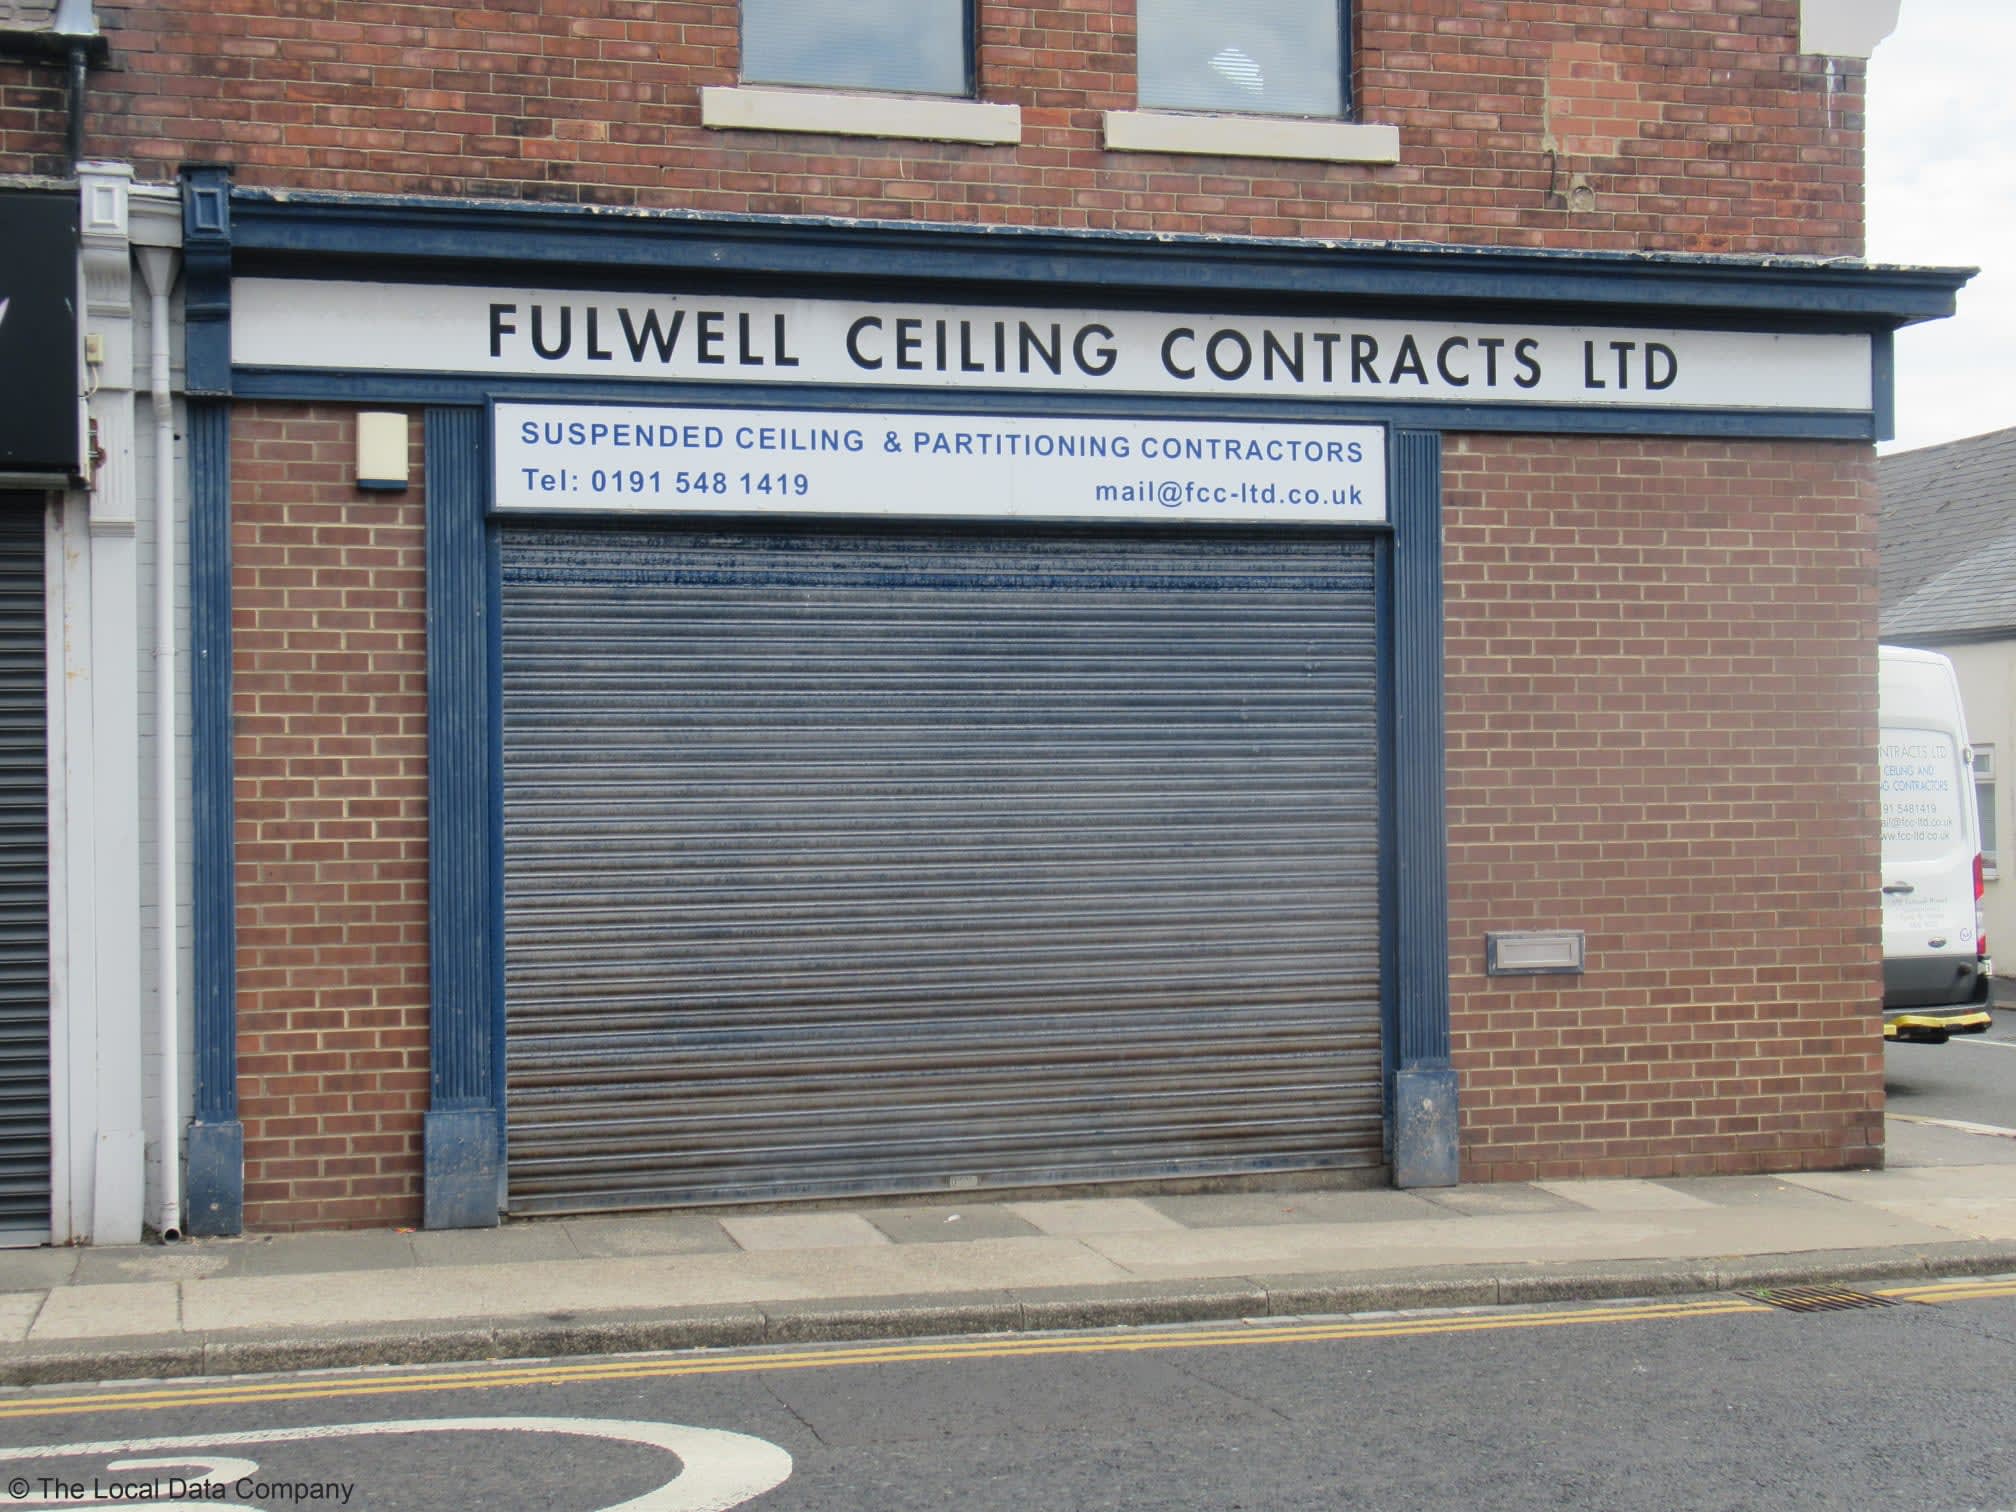 Images Fulwell Ceiling Contracts Ltd